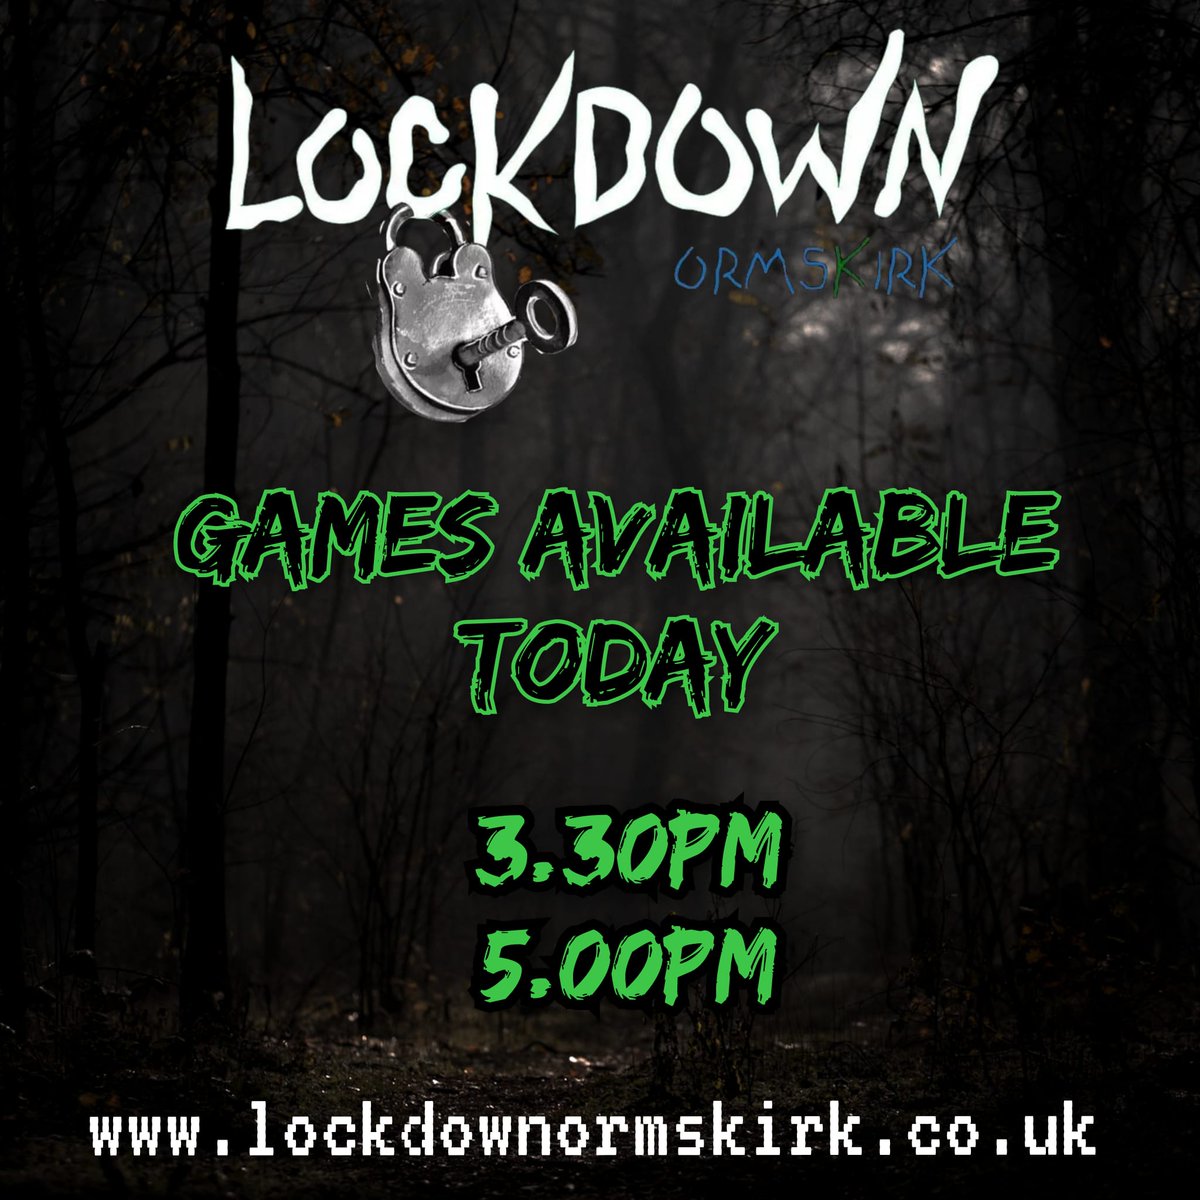 Only 2 games left today guys 🤟

lockdownormskirk.co.uk 

#Ormskirk #ormskirkescaperooms #ormskirkgingerbreadfestival #whatsonormskirk #whatsonsouthport #whatsonpreston #whatsonthisweekend #whatsonliverpool #Liverpool #Wigan #Southport #skelmersdale #StHelens #chorley #sundays